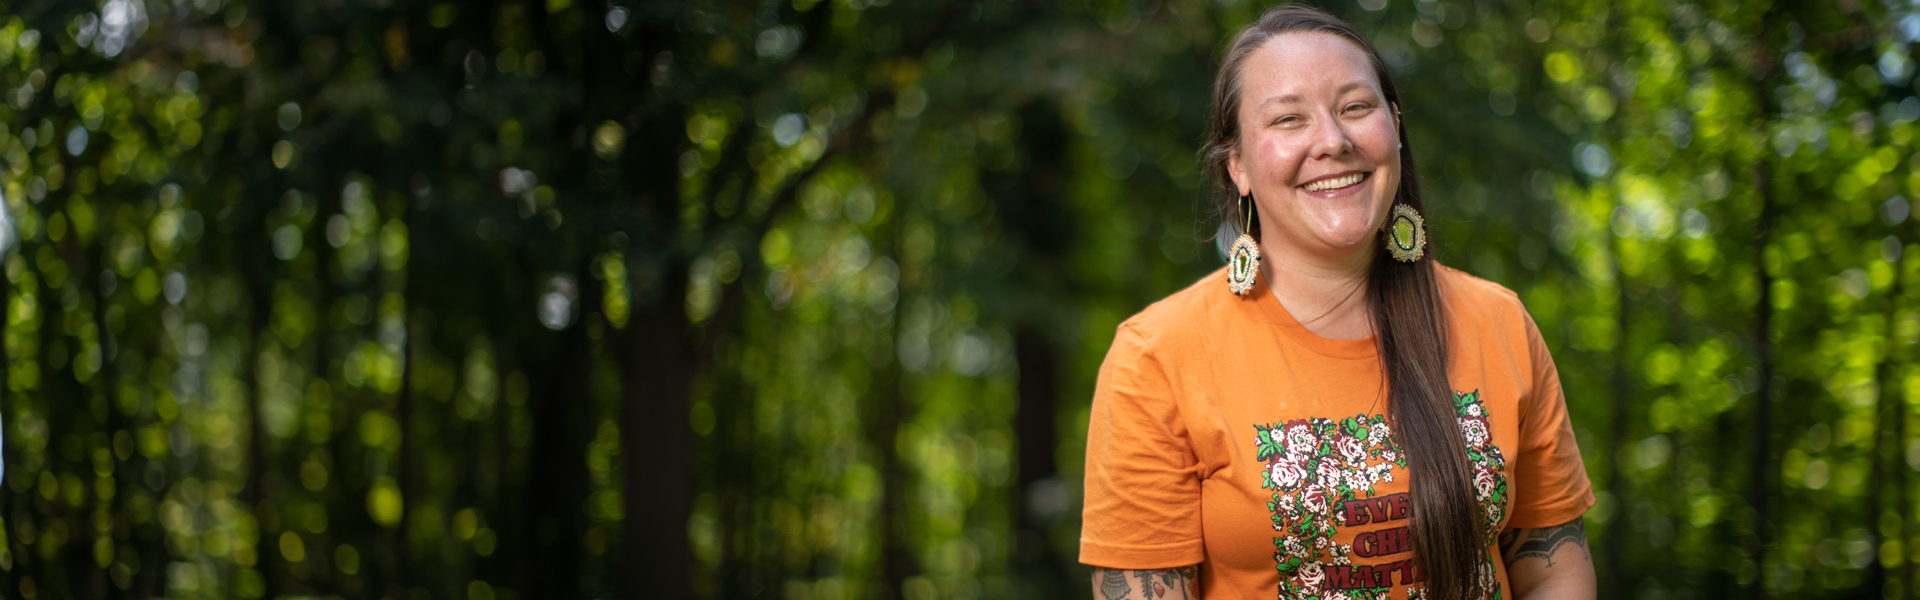 Photo of Indigenous woman smiling in front of greenery wearing an orange t-shirt